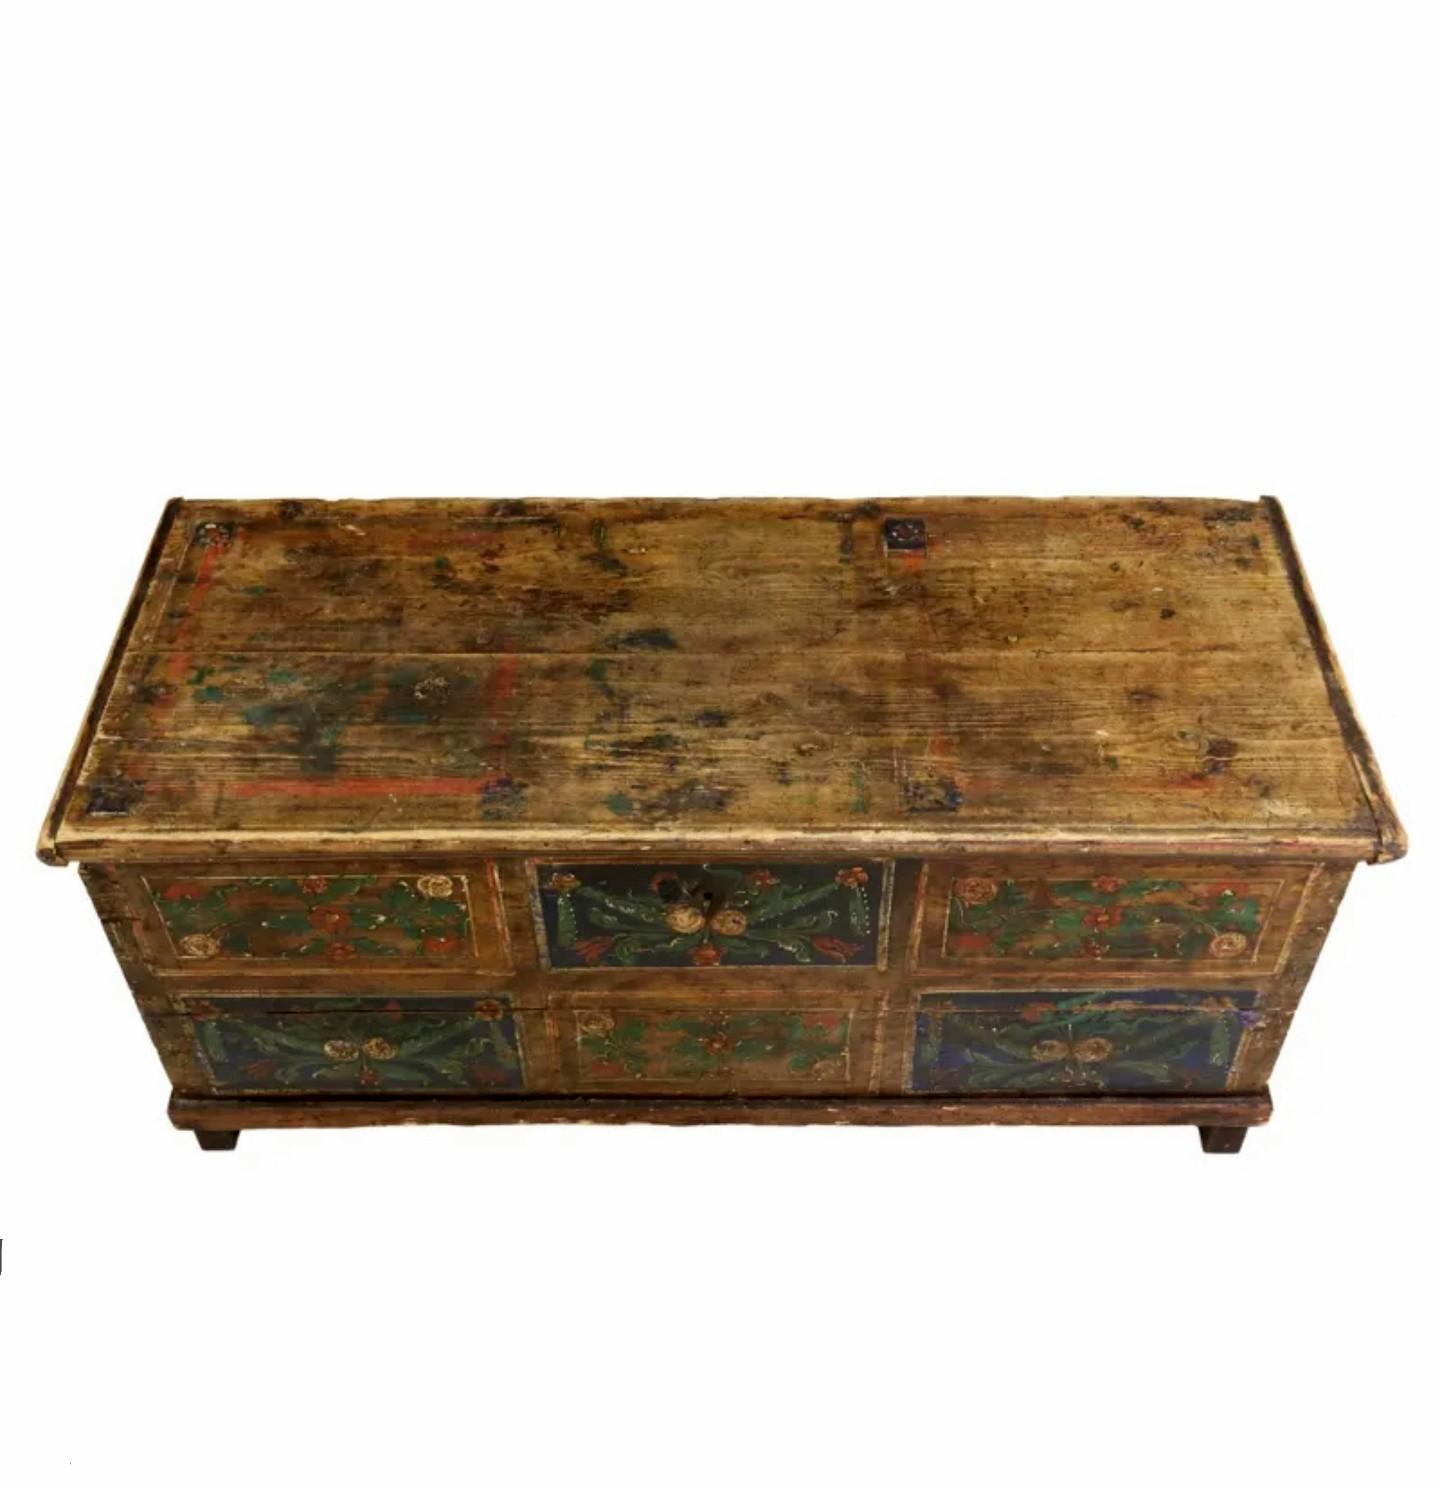 Early 19th Century Scandinavian Hand-Painted Pine Blanket Chest For Sale 7